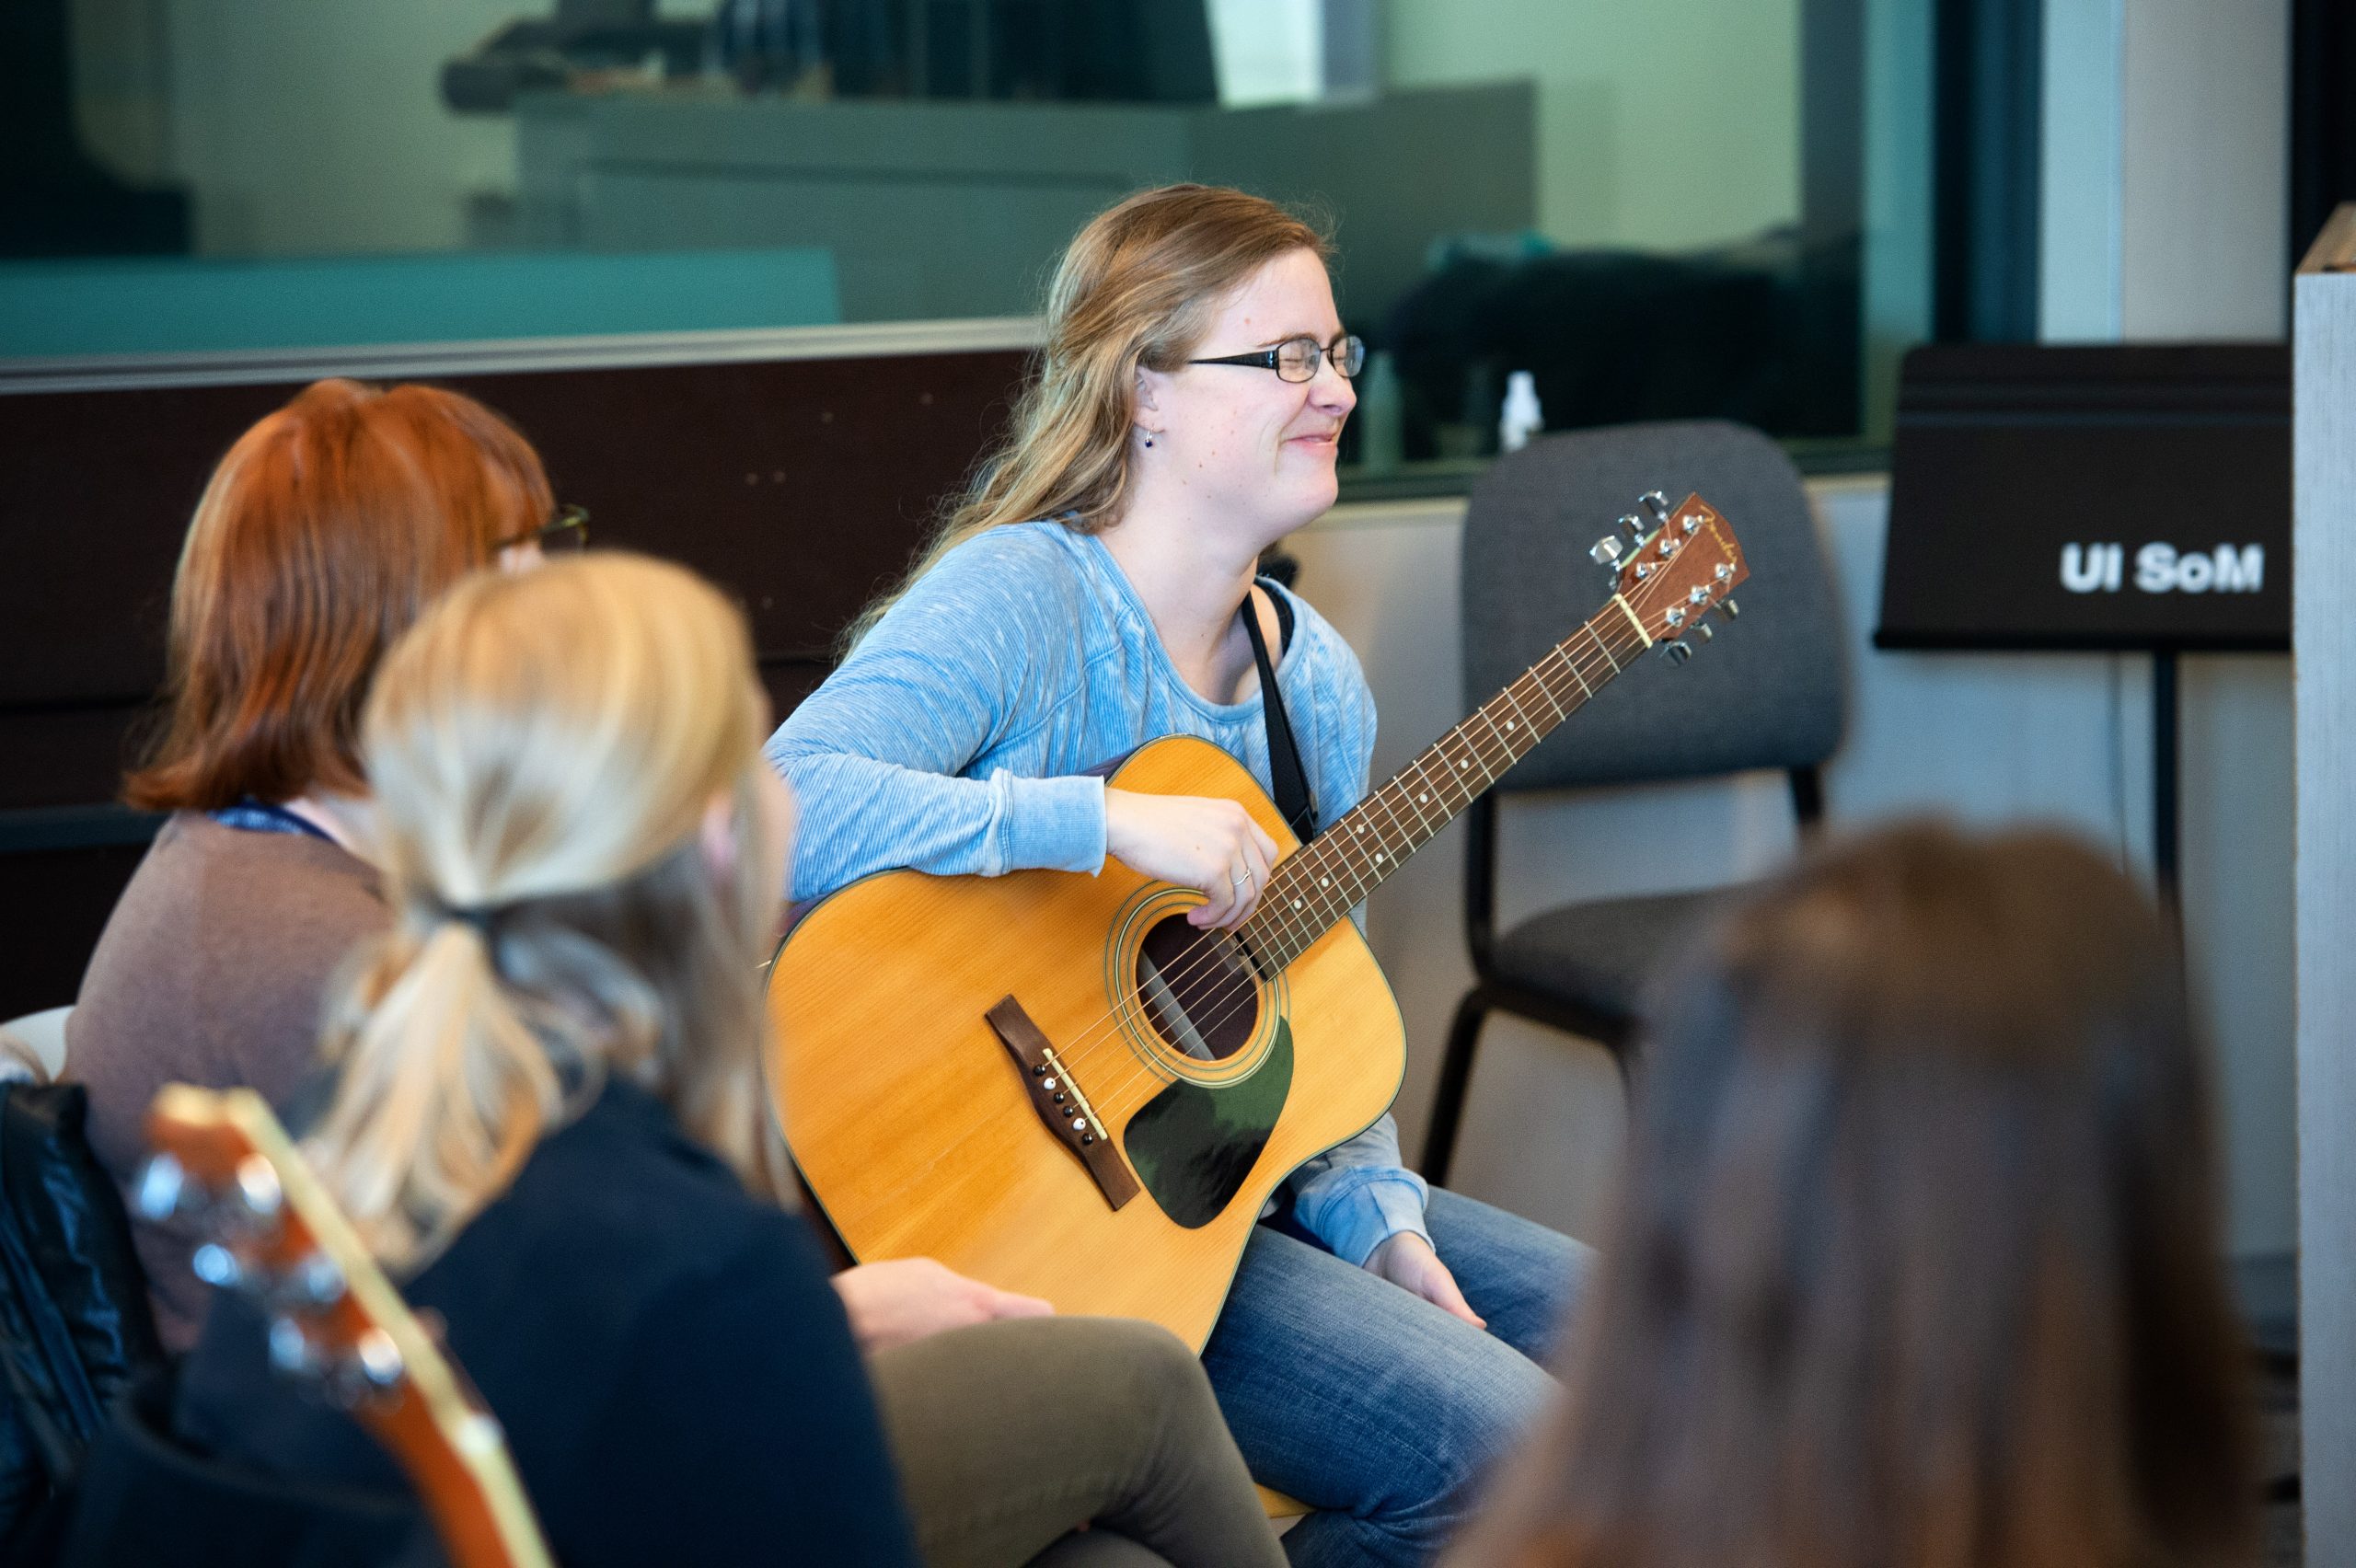 Students developing skills on guitars for use in clinical music therapy sessions.